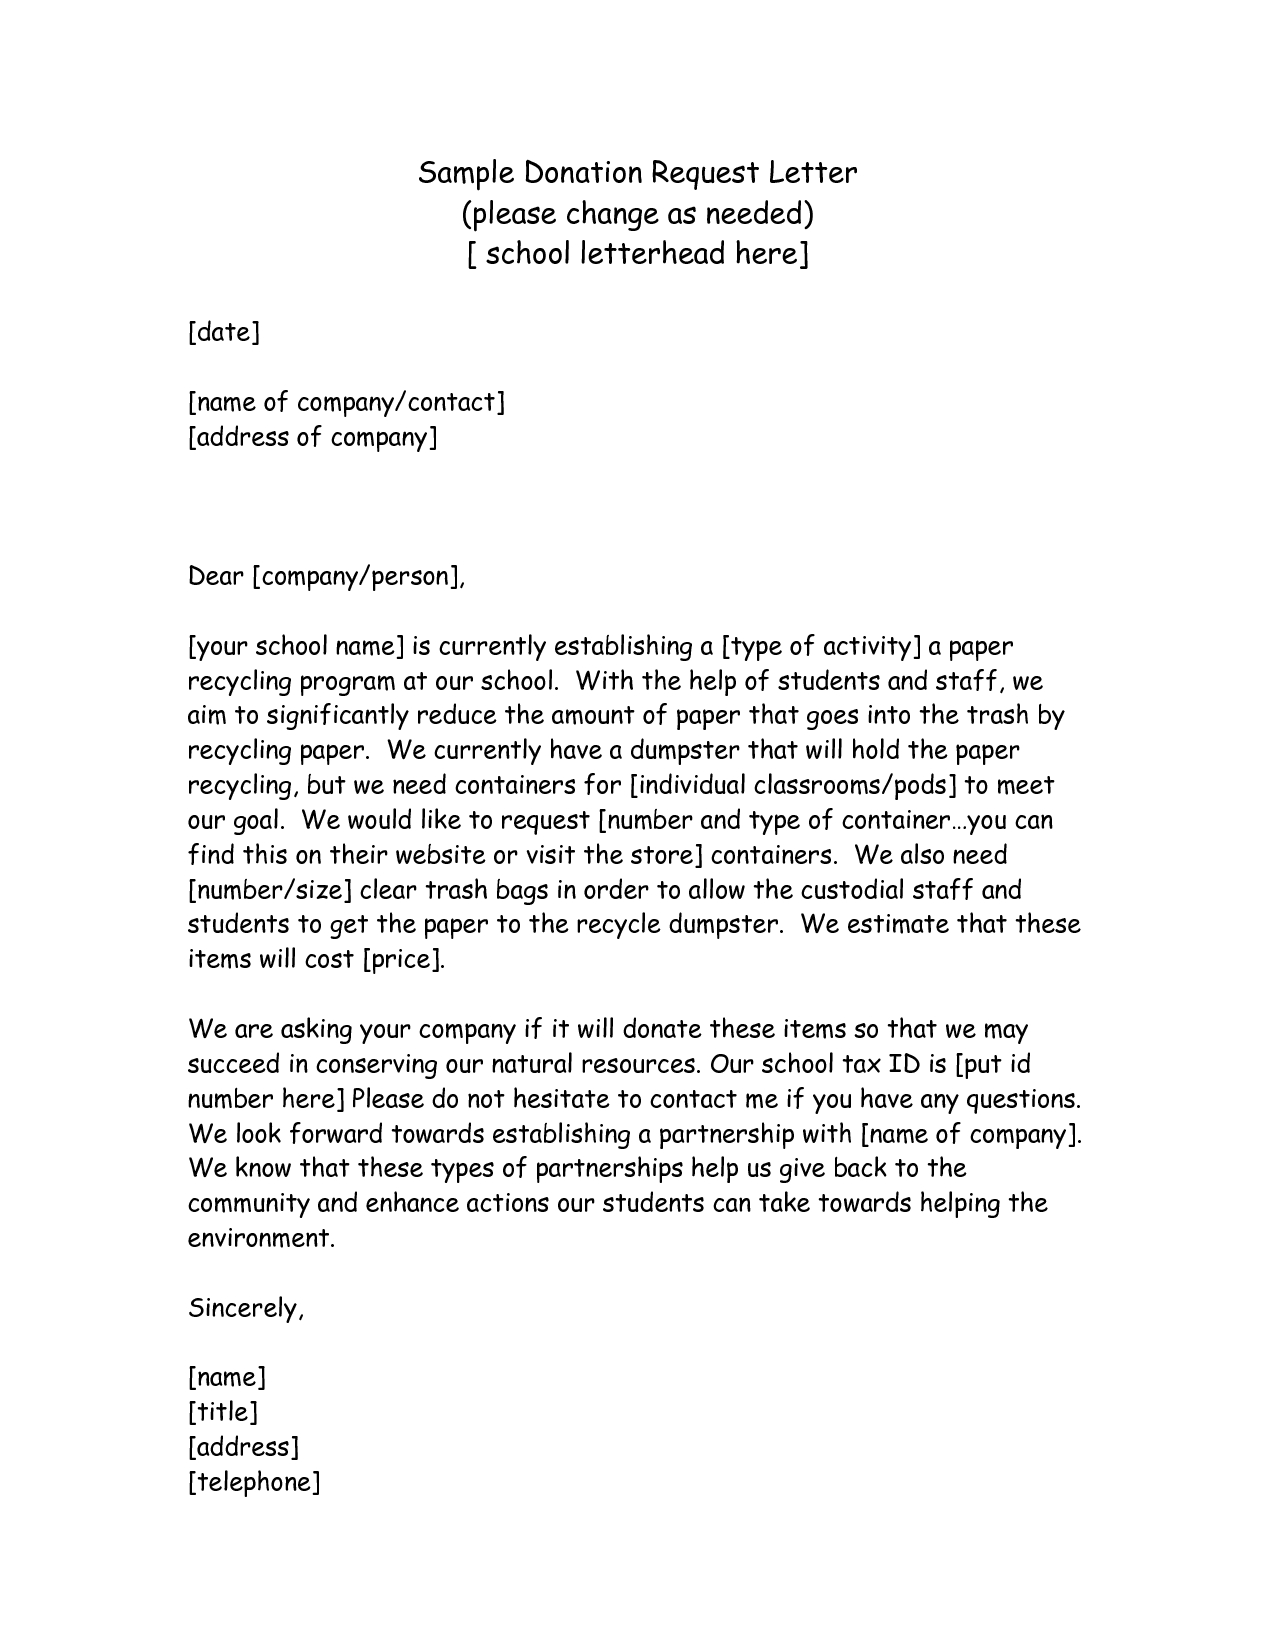 Letter asking for Donations Template - Examples for Donation Letters